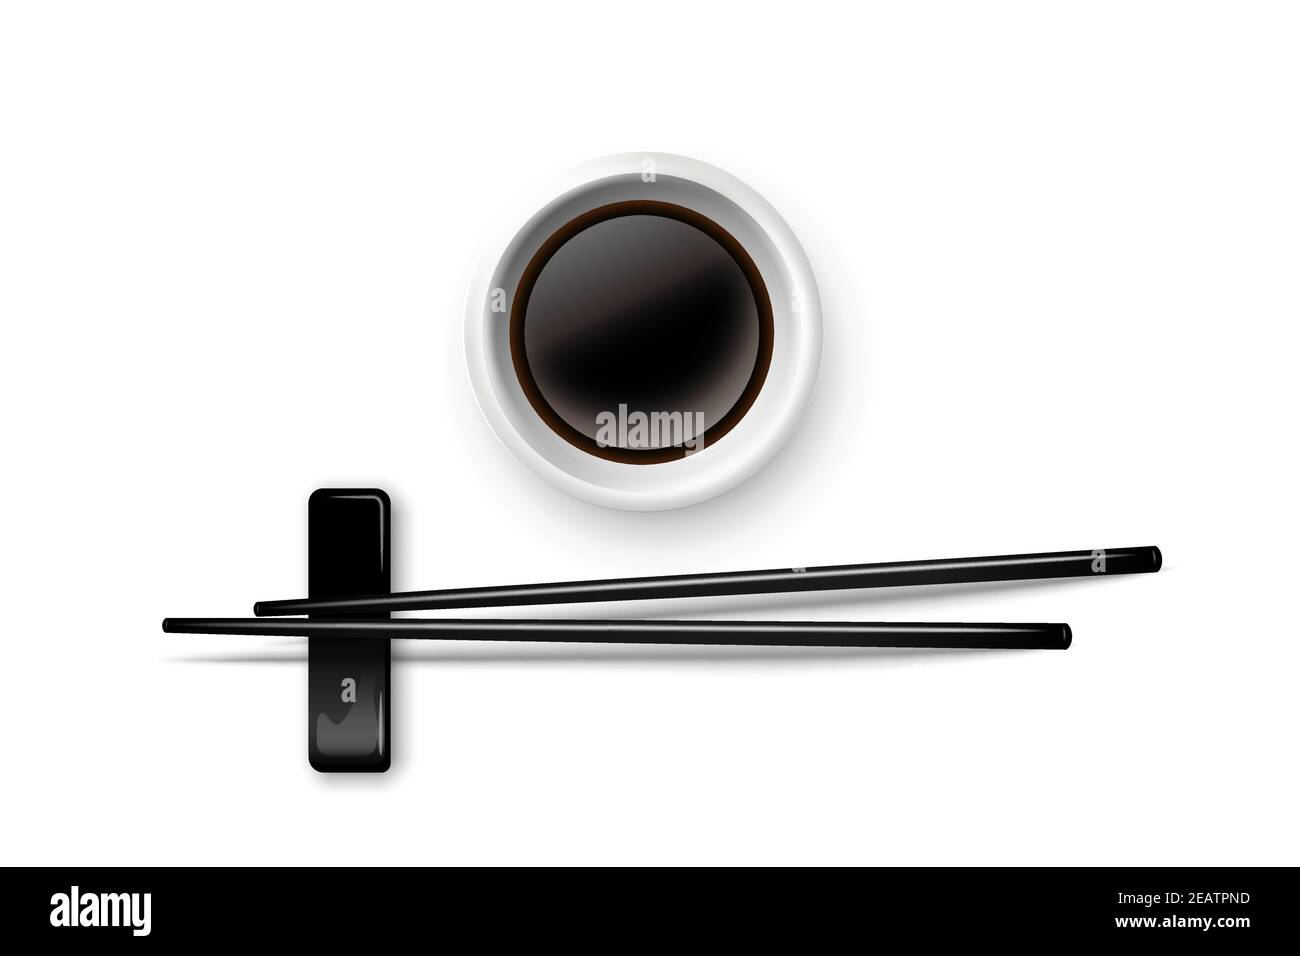 https://c8.alamy.com/comp/2EATPND/sushi-chopsticks-and-soy-sauce-in-bowl-chinese-or-japanese-cuisine-elements-for-eating-vector-illustration-black-wooden-pair-of-sticks-and-plate-wit-2EATPND.jpg